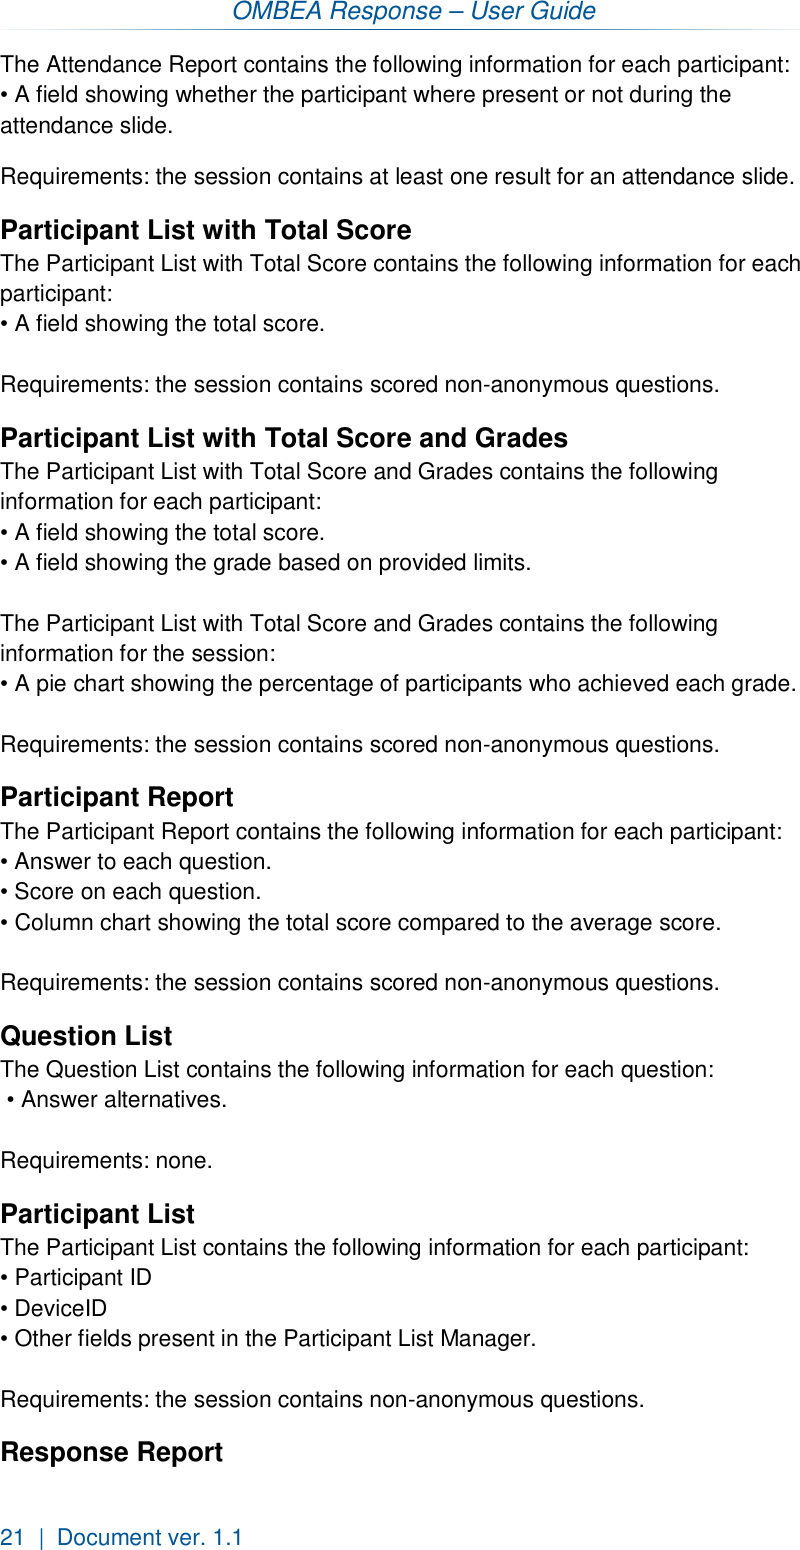 OMBEA Response – User Guide 21  |  Document ver. 1.1  The Attendance Report contains the following information for each participant: • A field showing whether the participant where present or not during the  attendance slide.  Requirements: the session contains at least one result for an attendance slide.   Participant List with Total Score The Participant List with Total Score contains the following information for each participant:  • A field showing the total score.   Requirements: the session contains scored non-anonymous questions. Participant List with Total Score and Grades The Participant List with Total Score and Grades contains the following information for each participant:  • A field showing the total score. • A field showing the grade based on provided limits.  The Participant List with Total Score and Grades contains the following information for the session: • A pie chart showing the percentage of participants who achieved each grade.   Requirements: the session contains scored non-anonymous questions. Participant Report The Participant Report contains the following information for each participant: • Answer to each question. • Score on each question.  • Column chart showing the total score compared to the average score.   Requirements: the session contains scored non-anonymous questions. Question List The Question List contains the following information for each question:  • Answer alternatives.  Requirements: none.  Participant List The Participant List contains the following information for each participant: • Participant ID • DeviceID • Other fields present in the Participant List Manager.  Requirements: the session contains non-anonymous questions. Response Report 